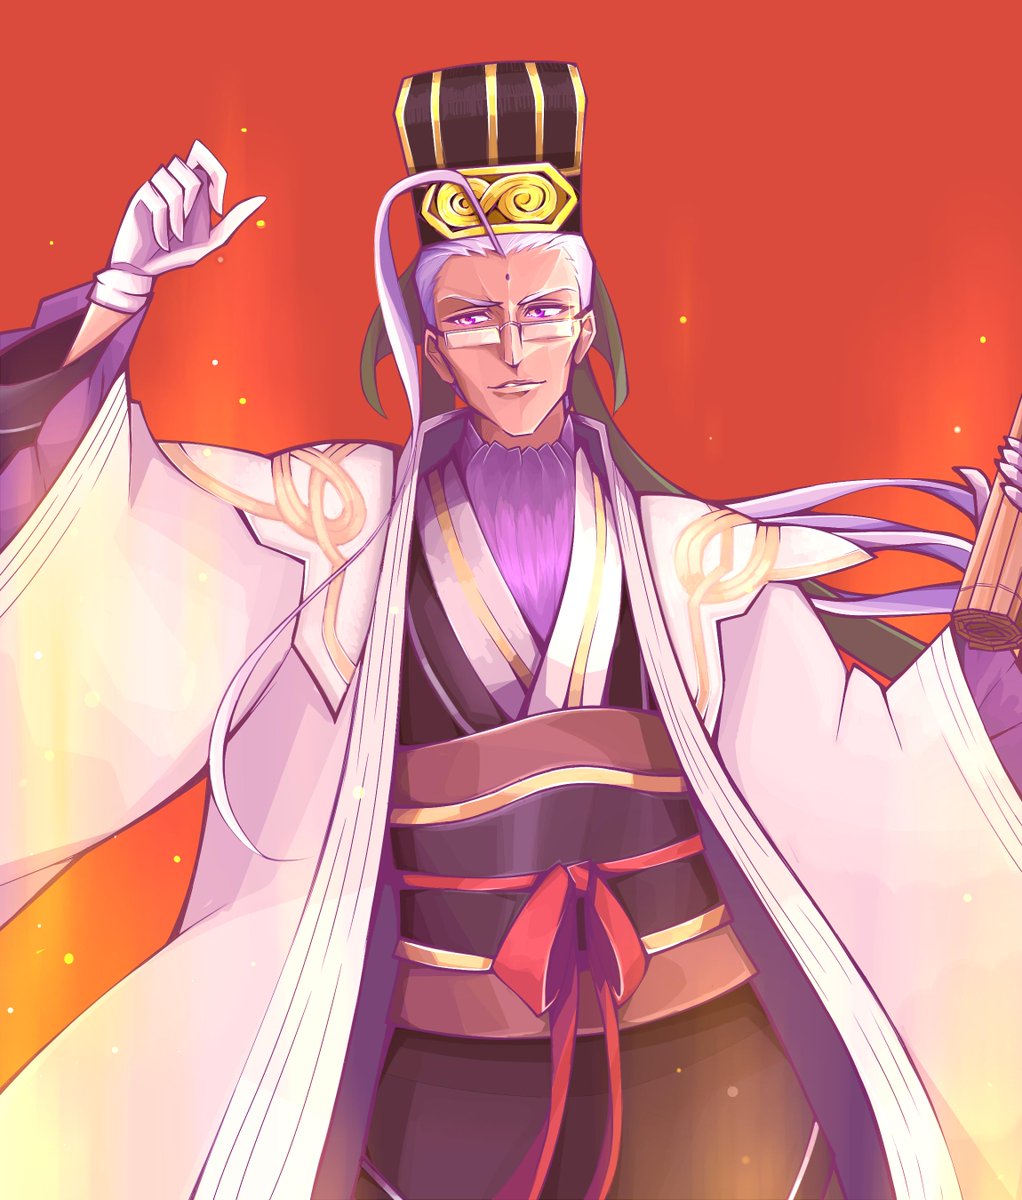 Lumi Chen Gong 陳宮 From Fate Grand Order Or My Take On Him Rather ㅁ This Was A Fun Experiment